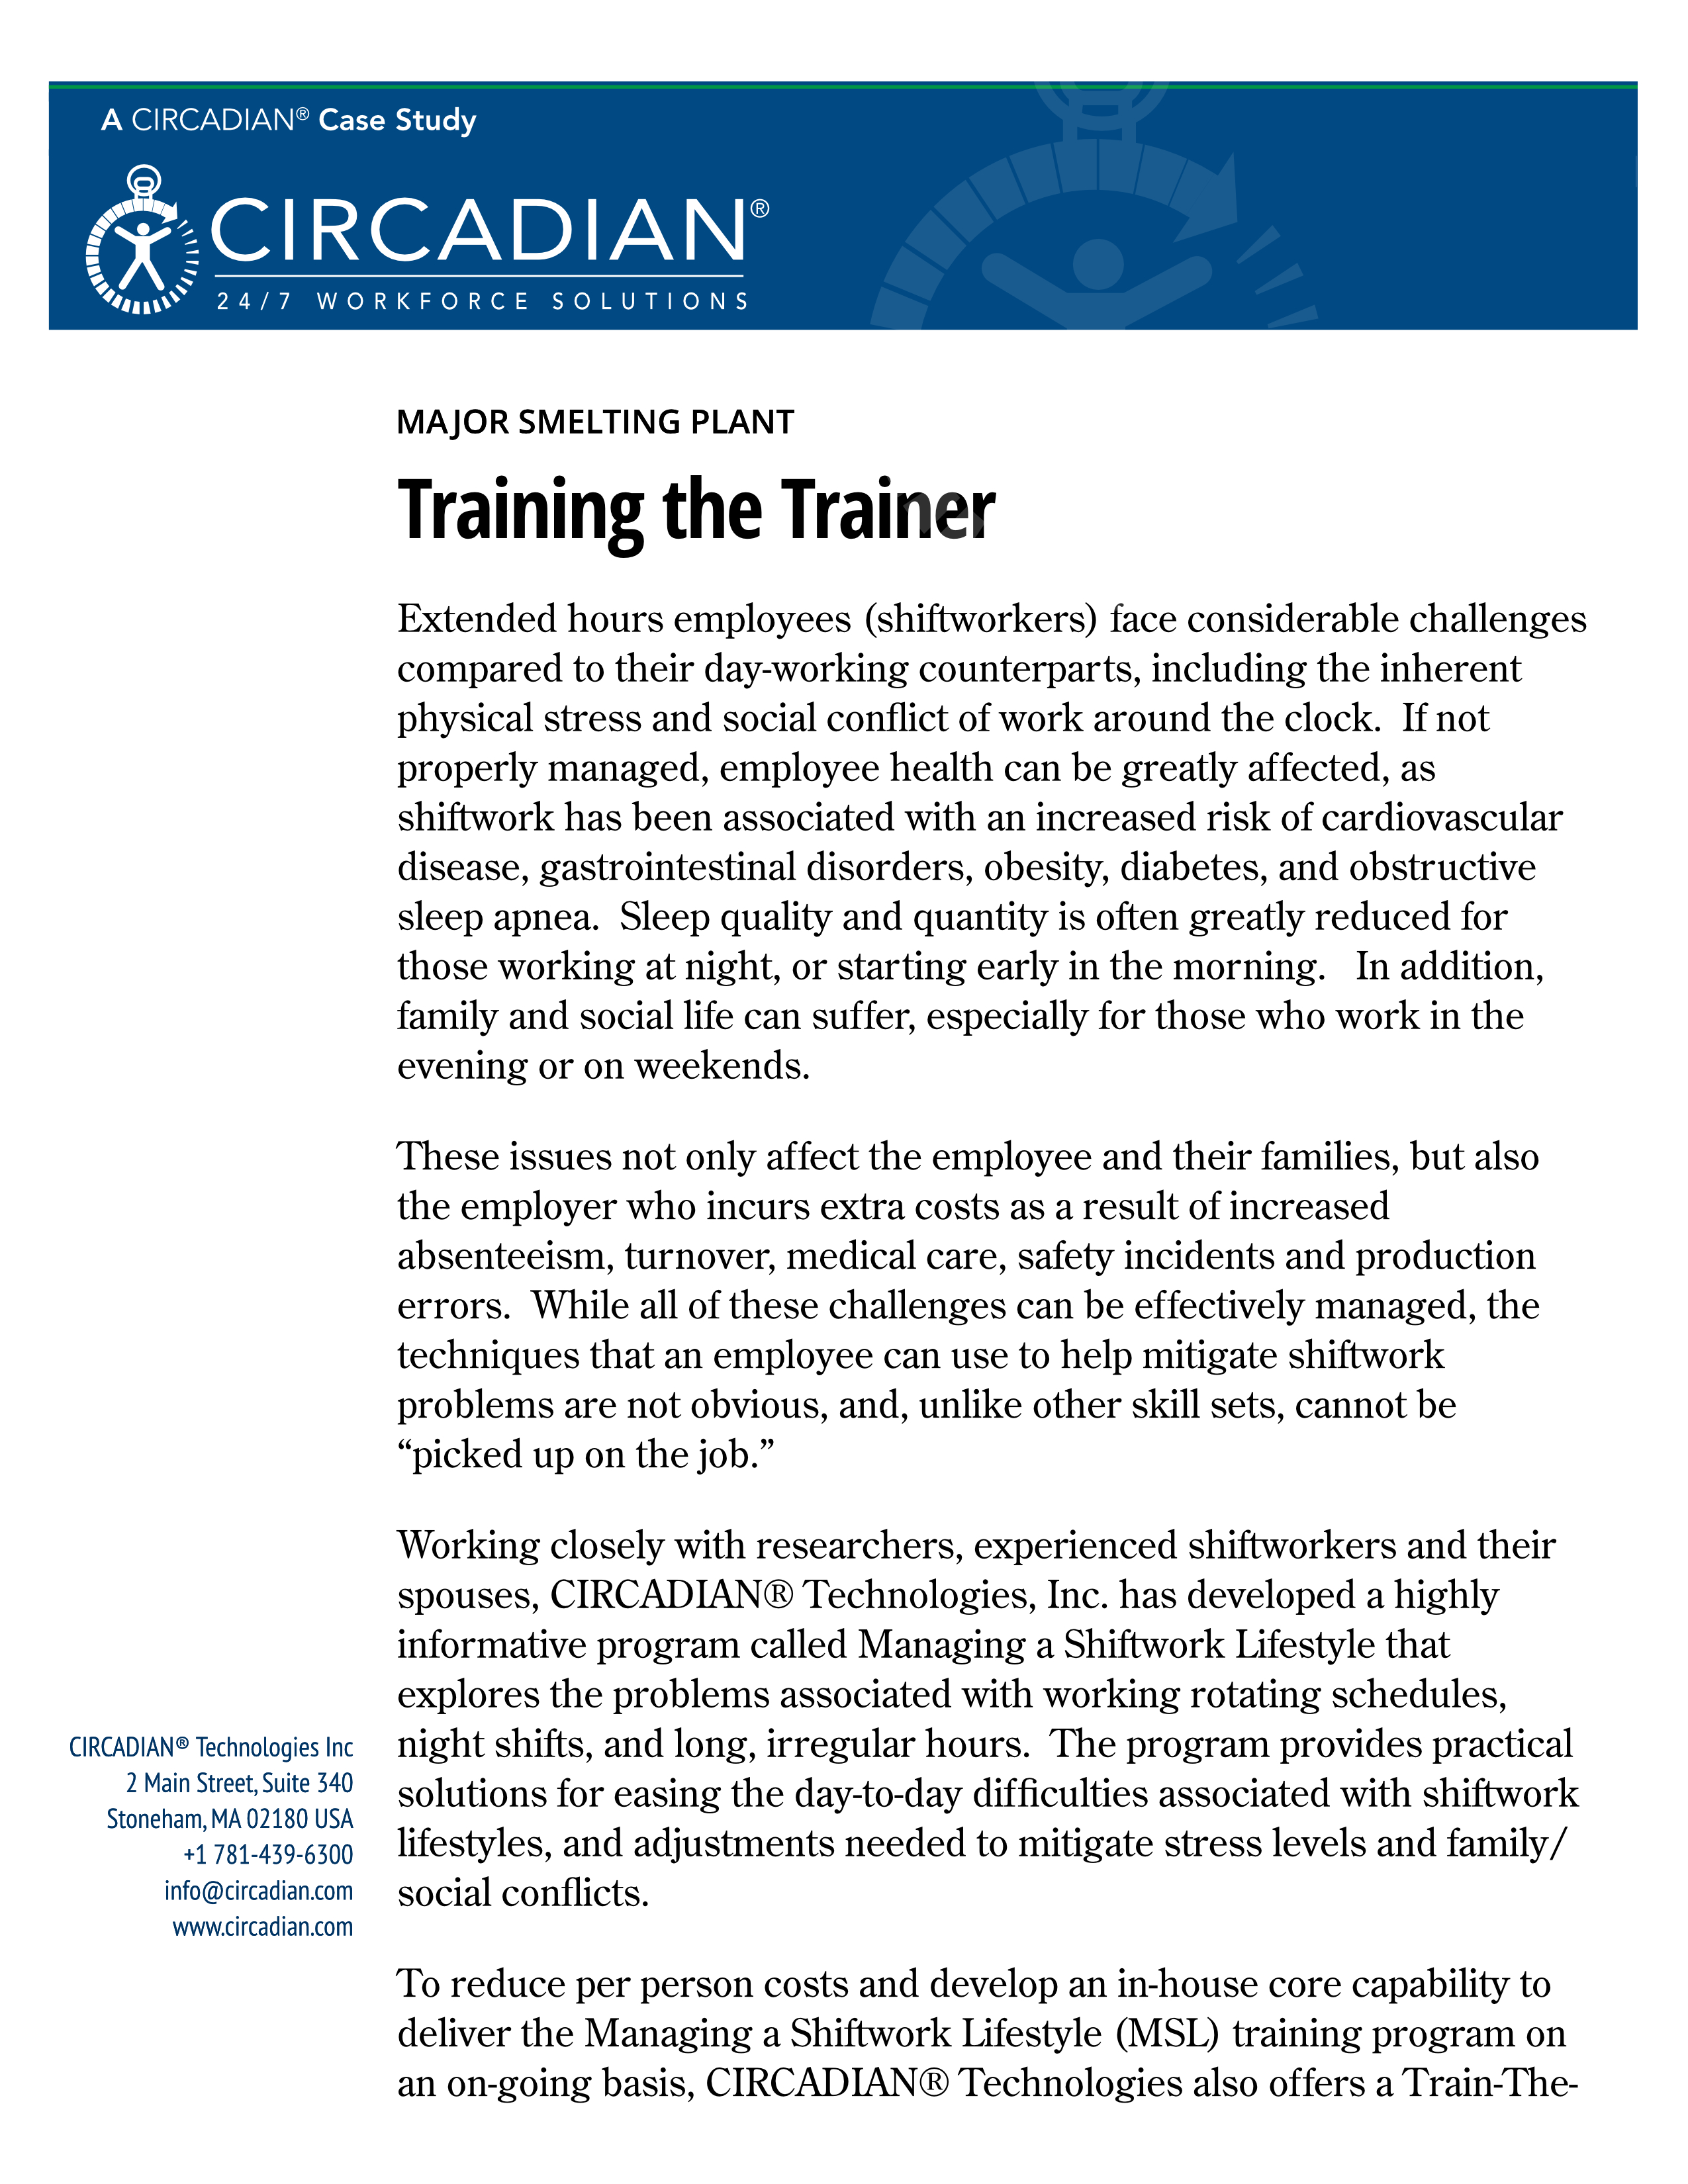 Case Study: Training the Trainer